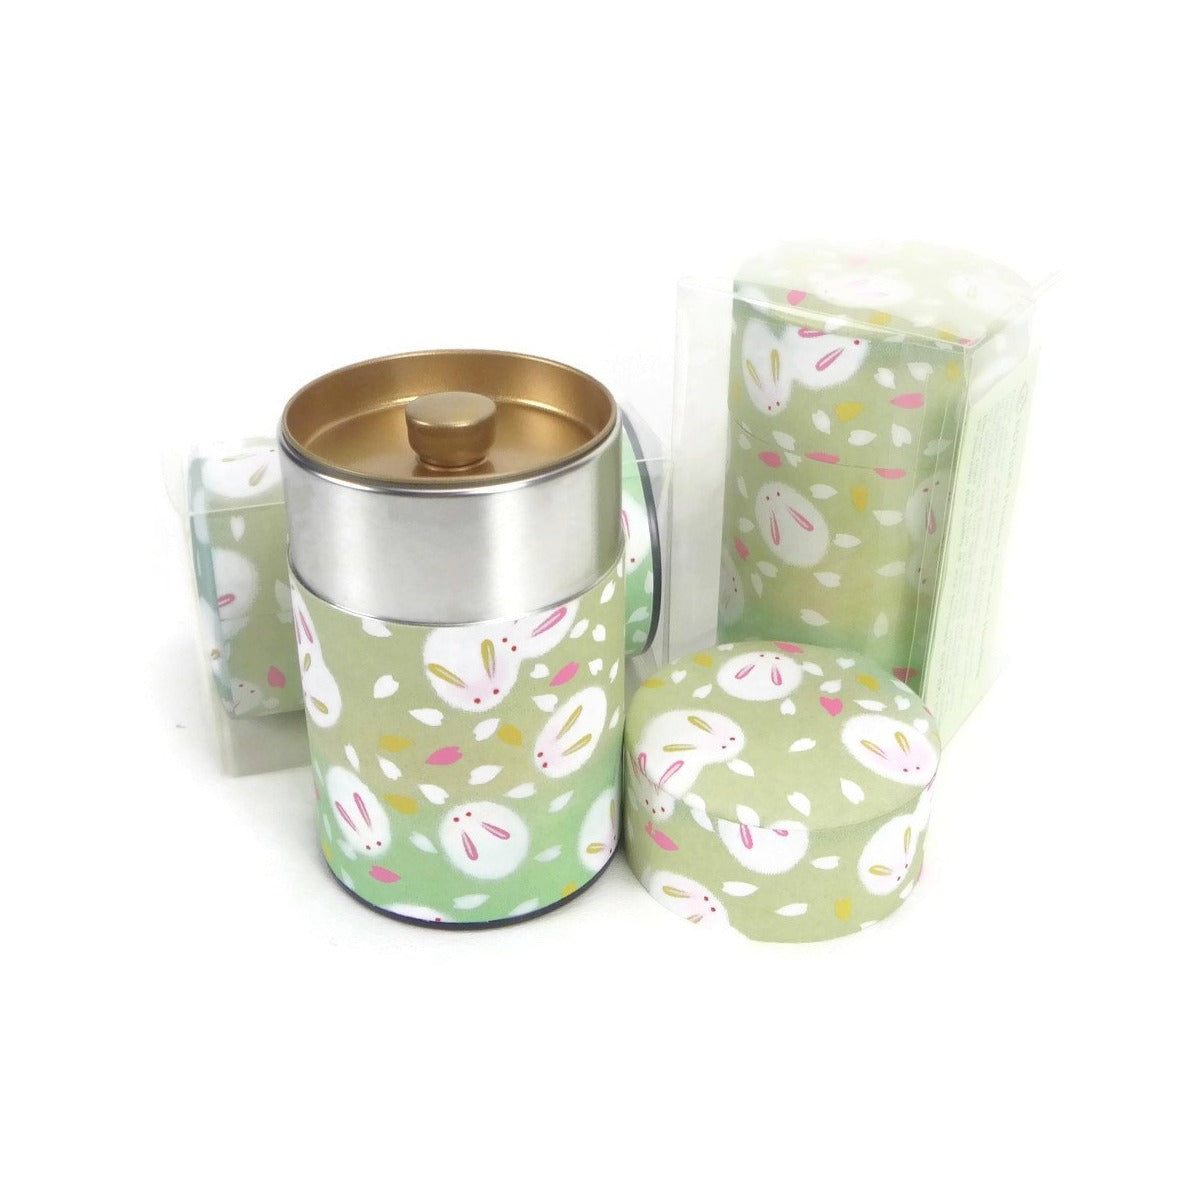 Fluffy Bunnies in Green Tea Canister - 3.5oz